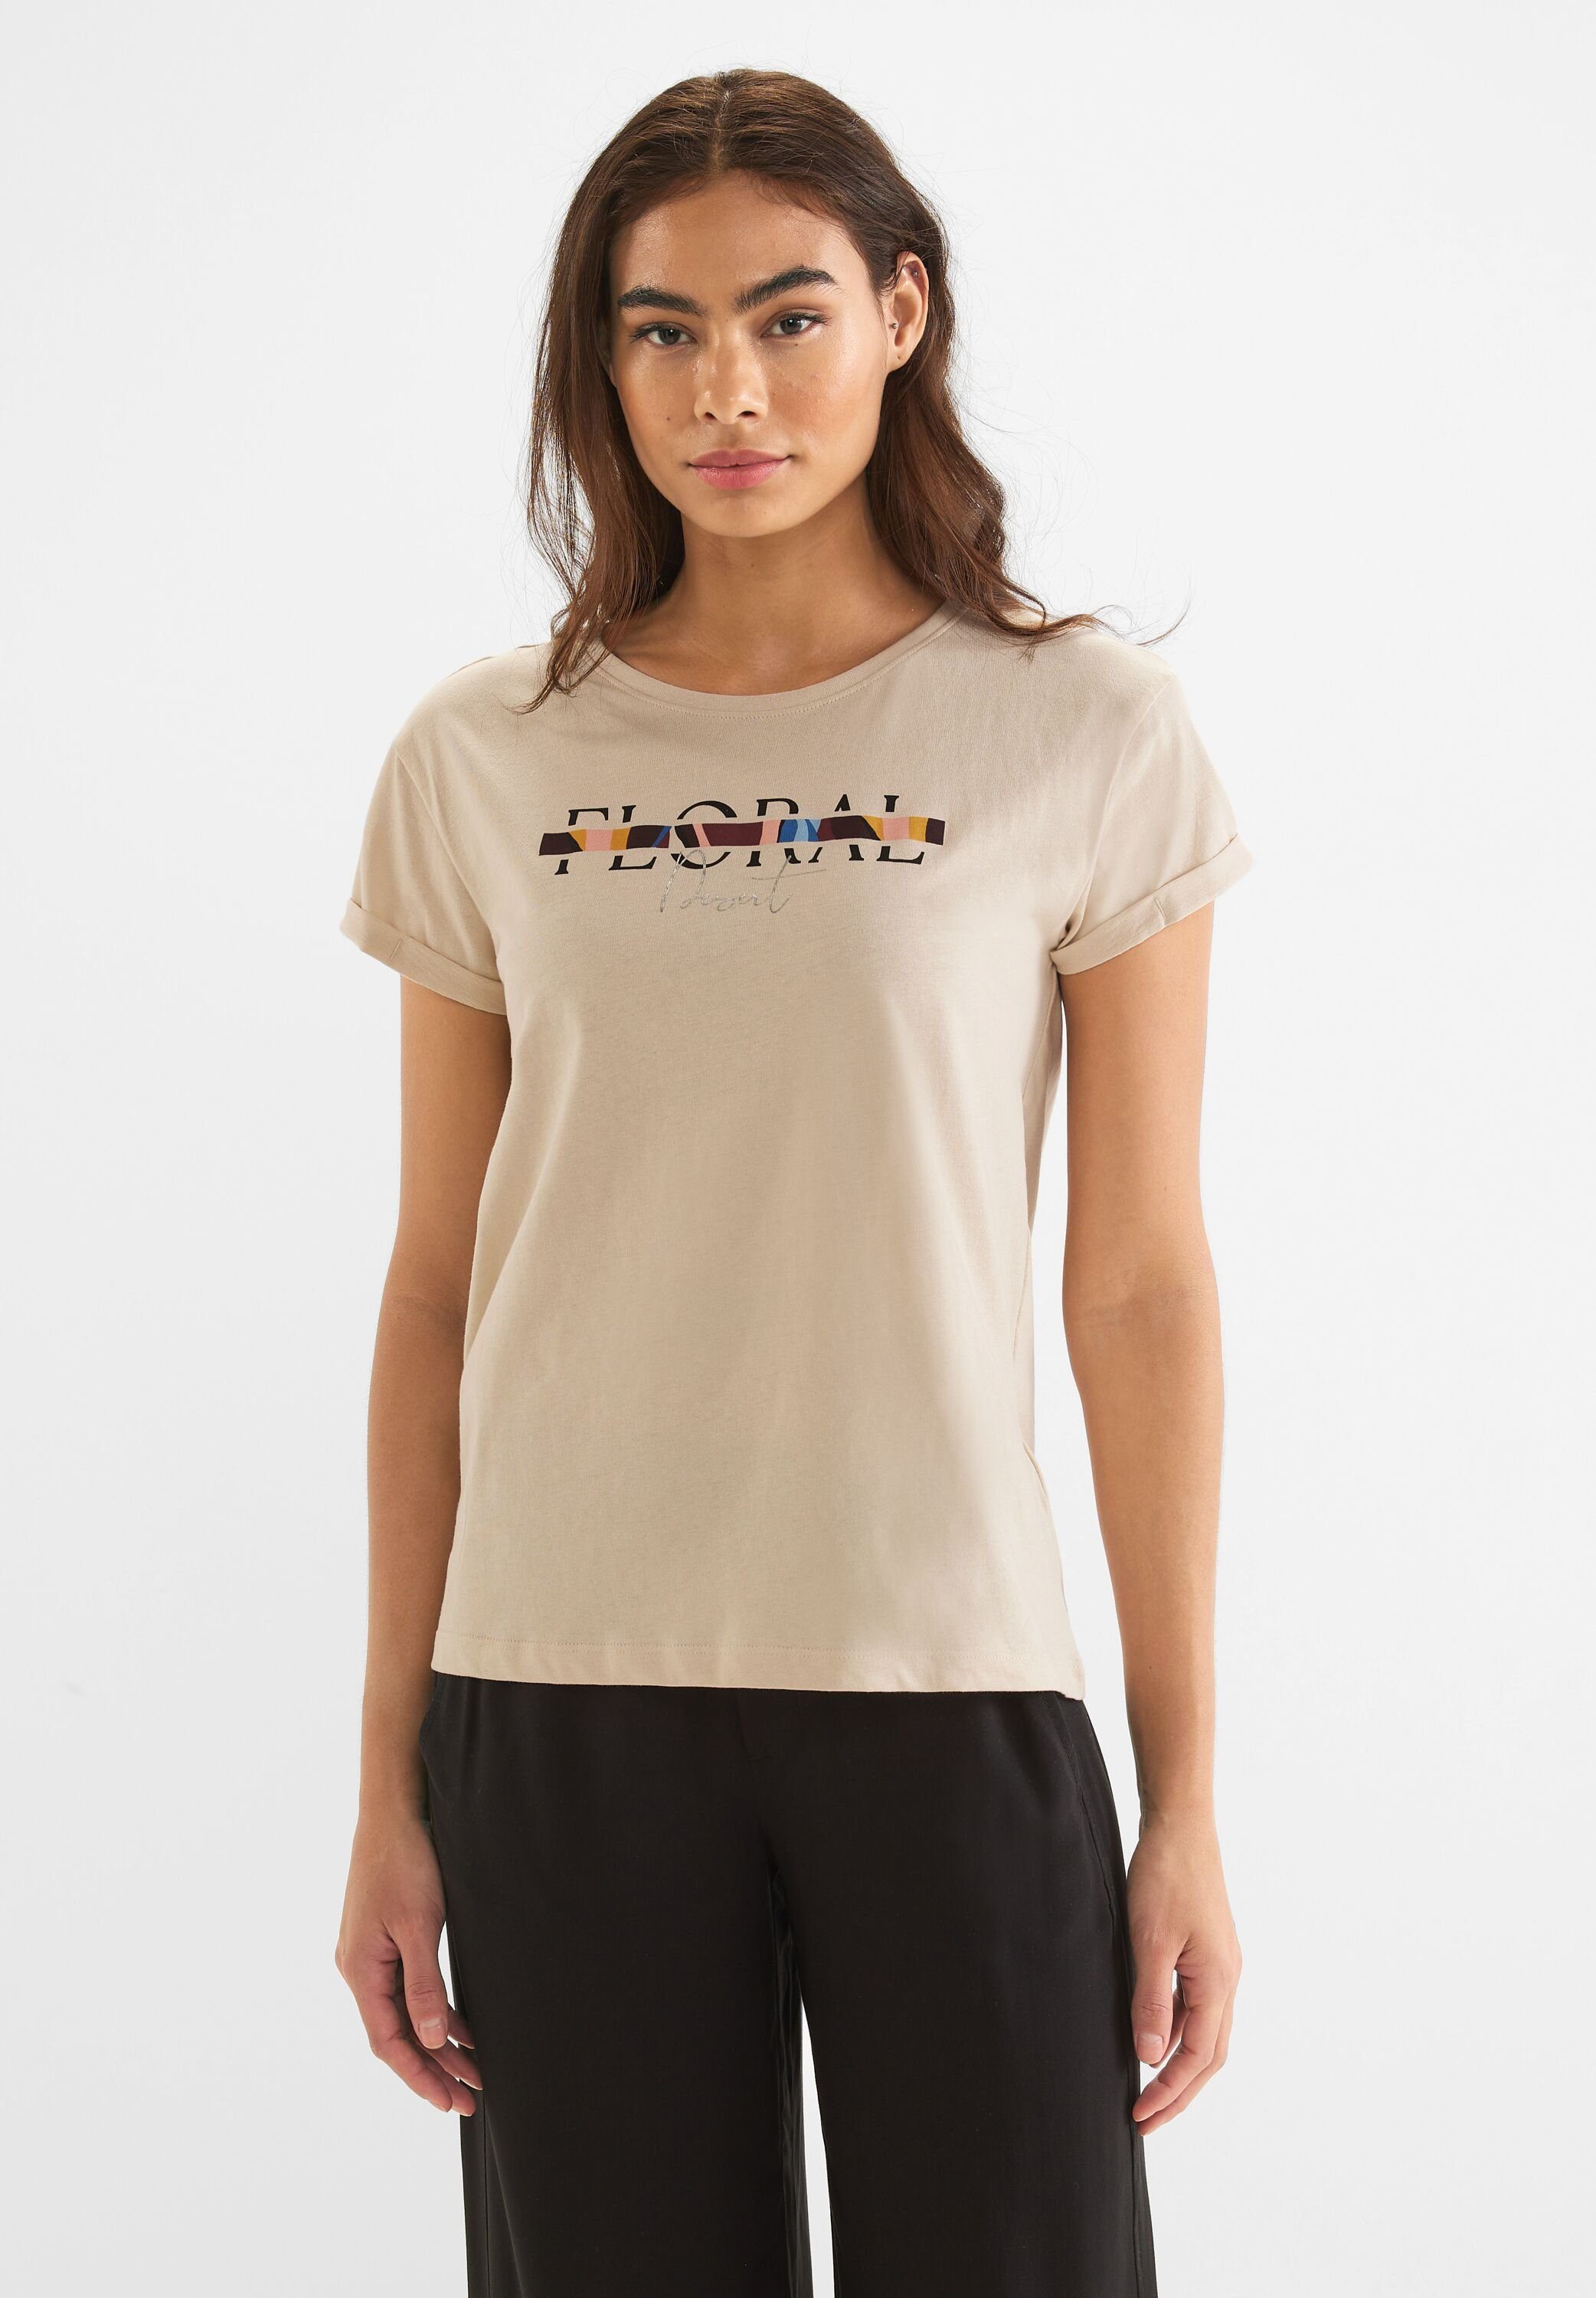 STREET ONE T-Shirt in Unifarbe light smooth sand